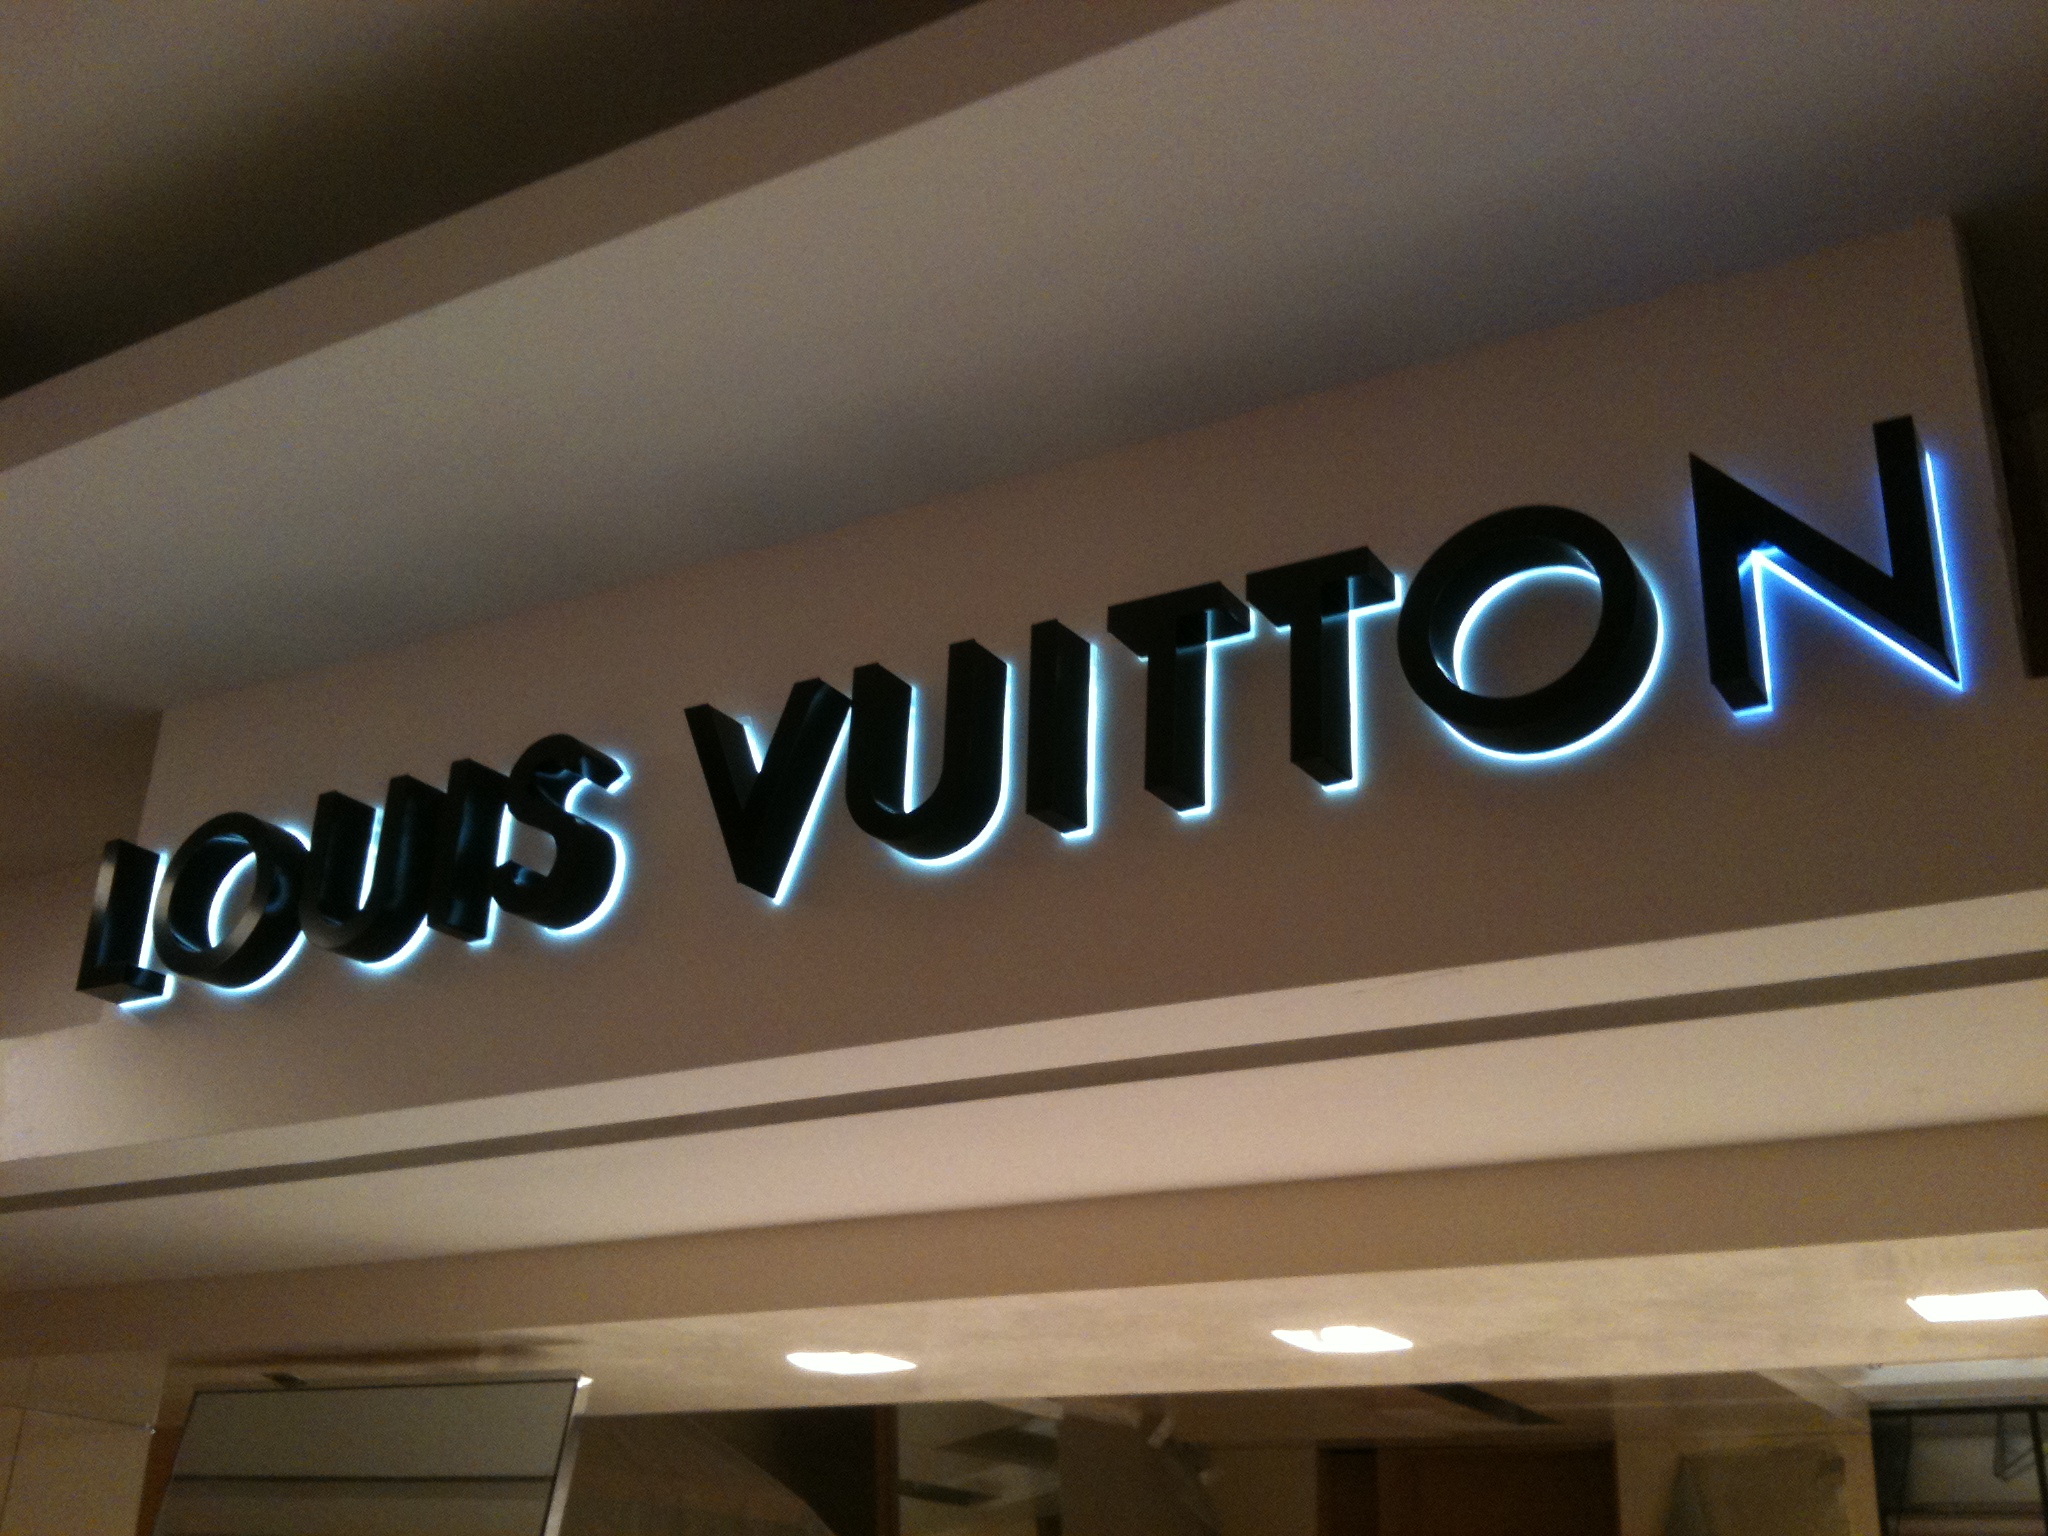 Louis Vuitton Built Up Letters and Neon Sign - Action Signs